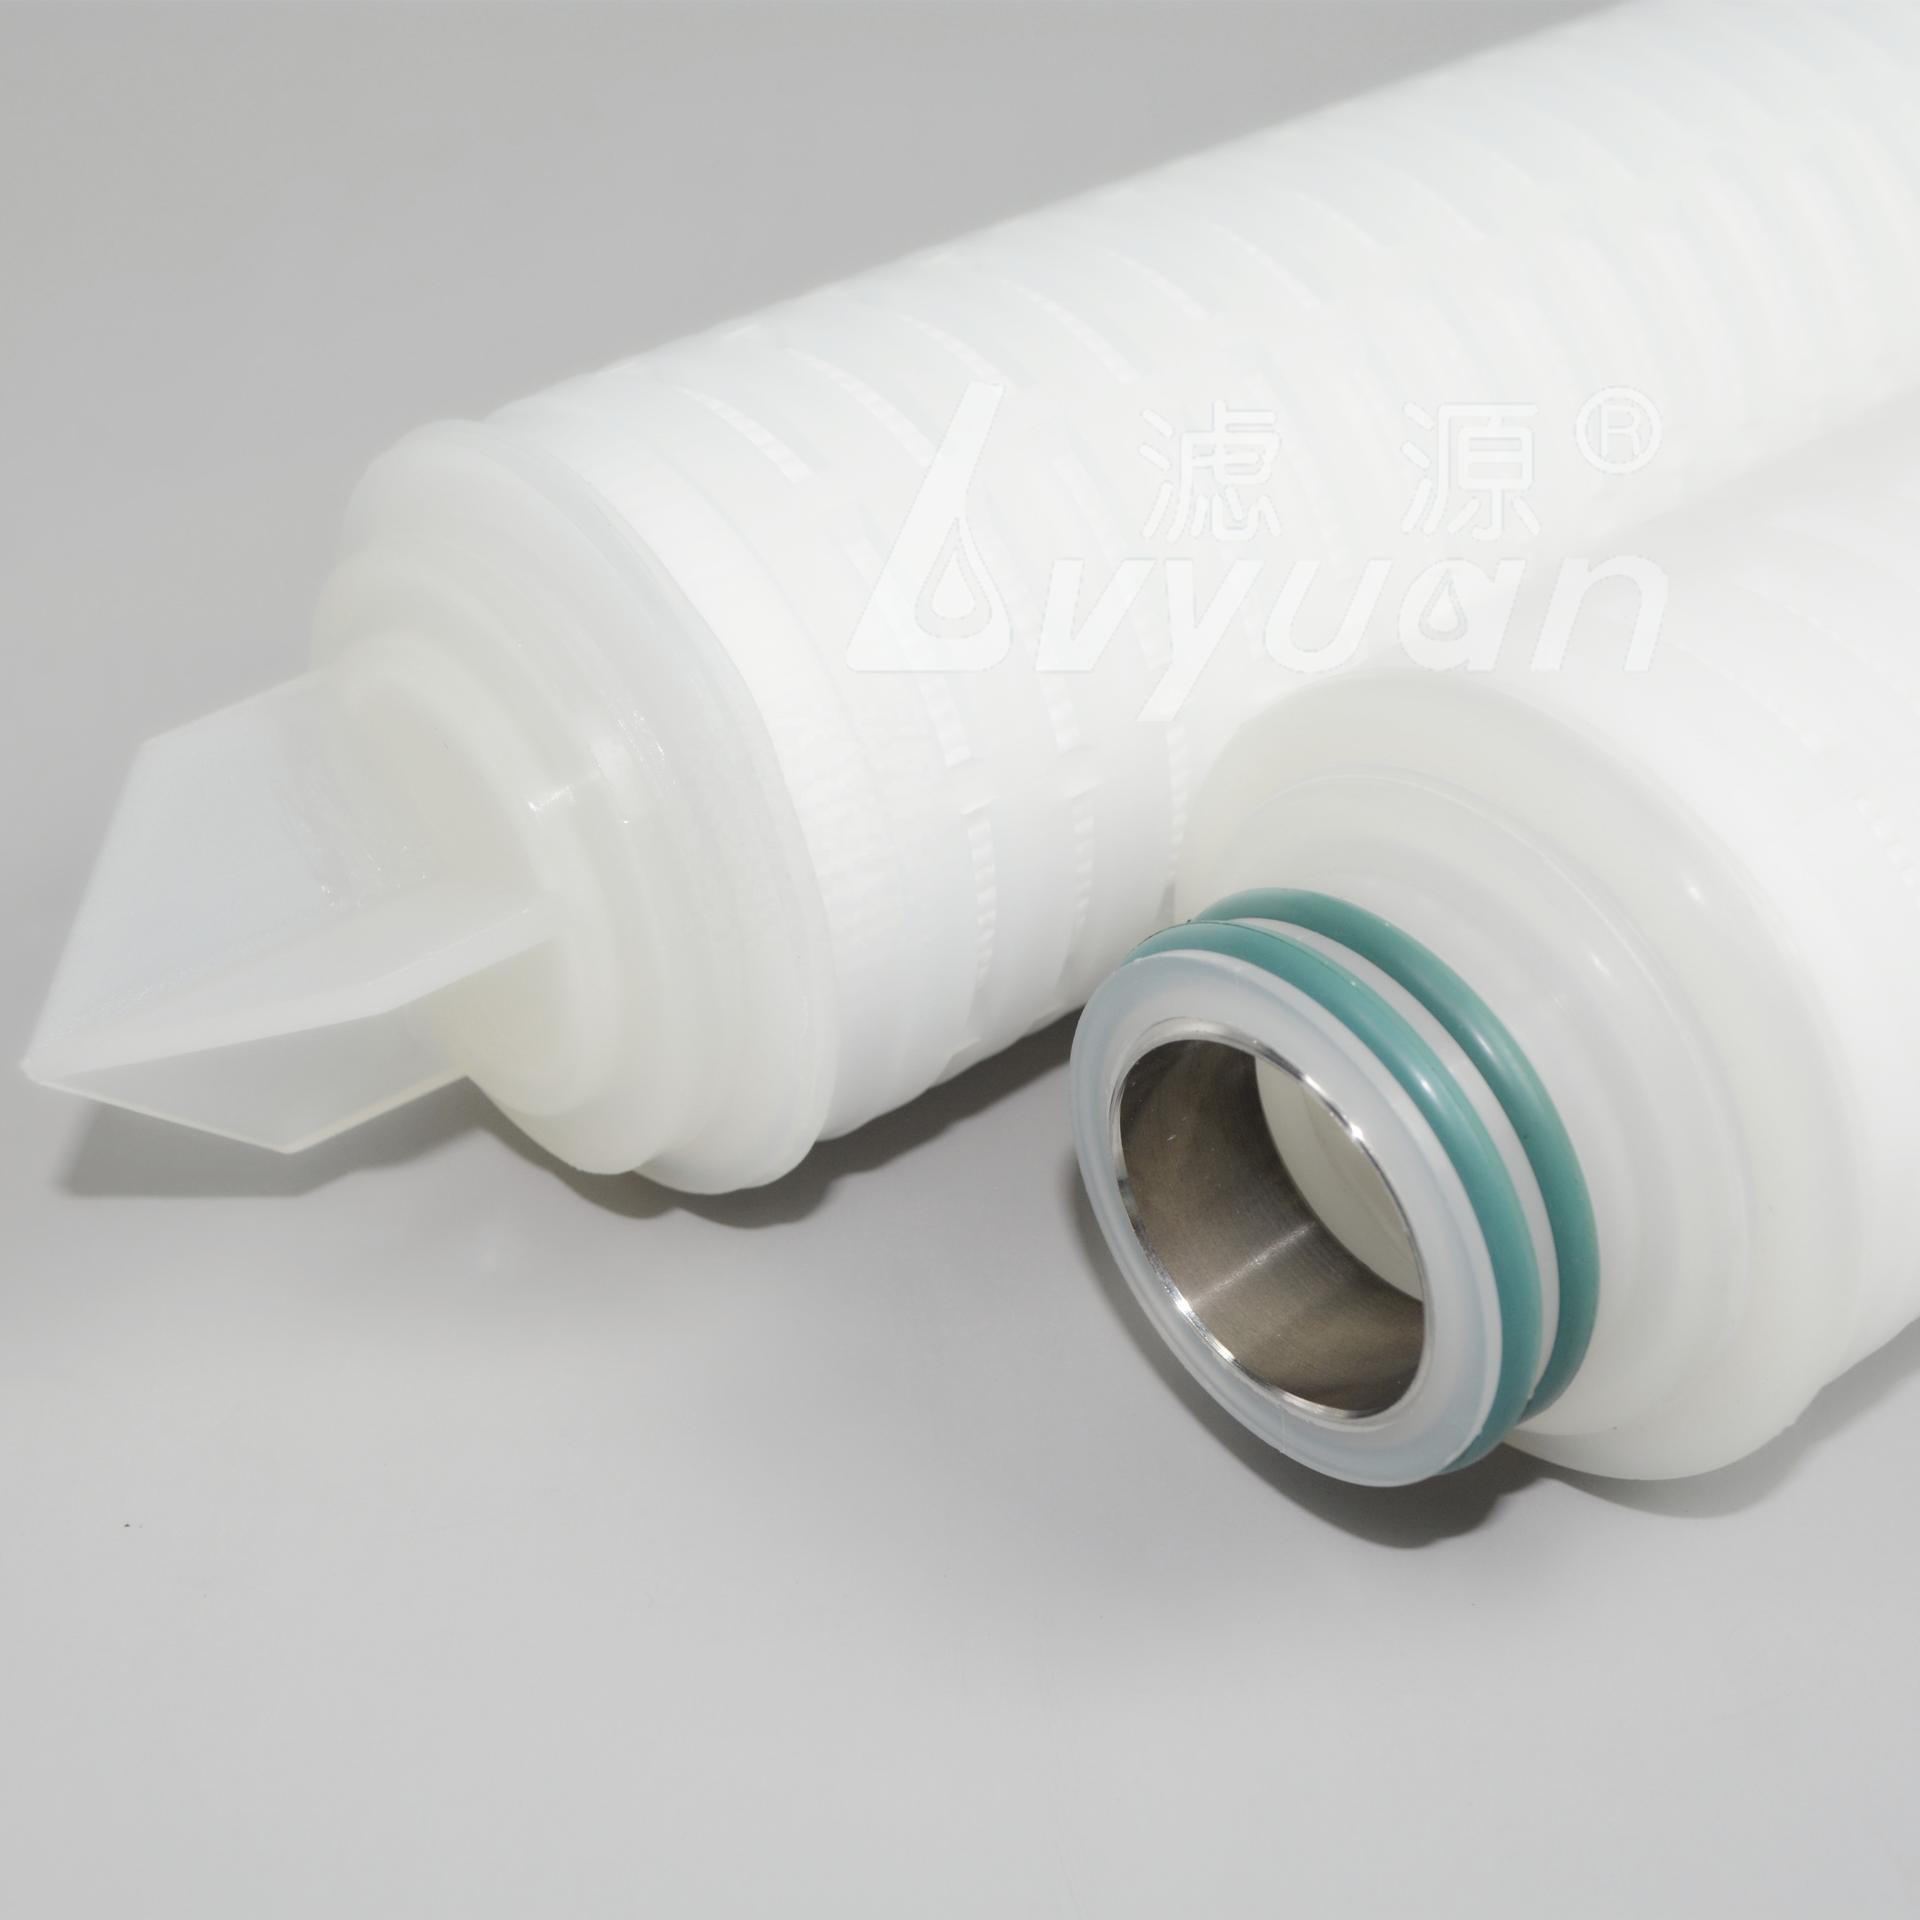 Hot sale PP Pleated water filter Cartridges /code 7 filter cartridge for water filtration